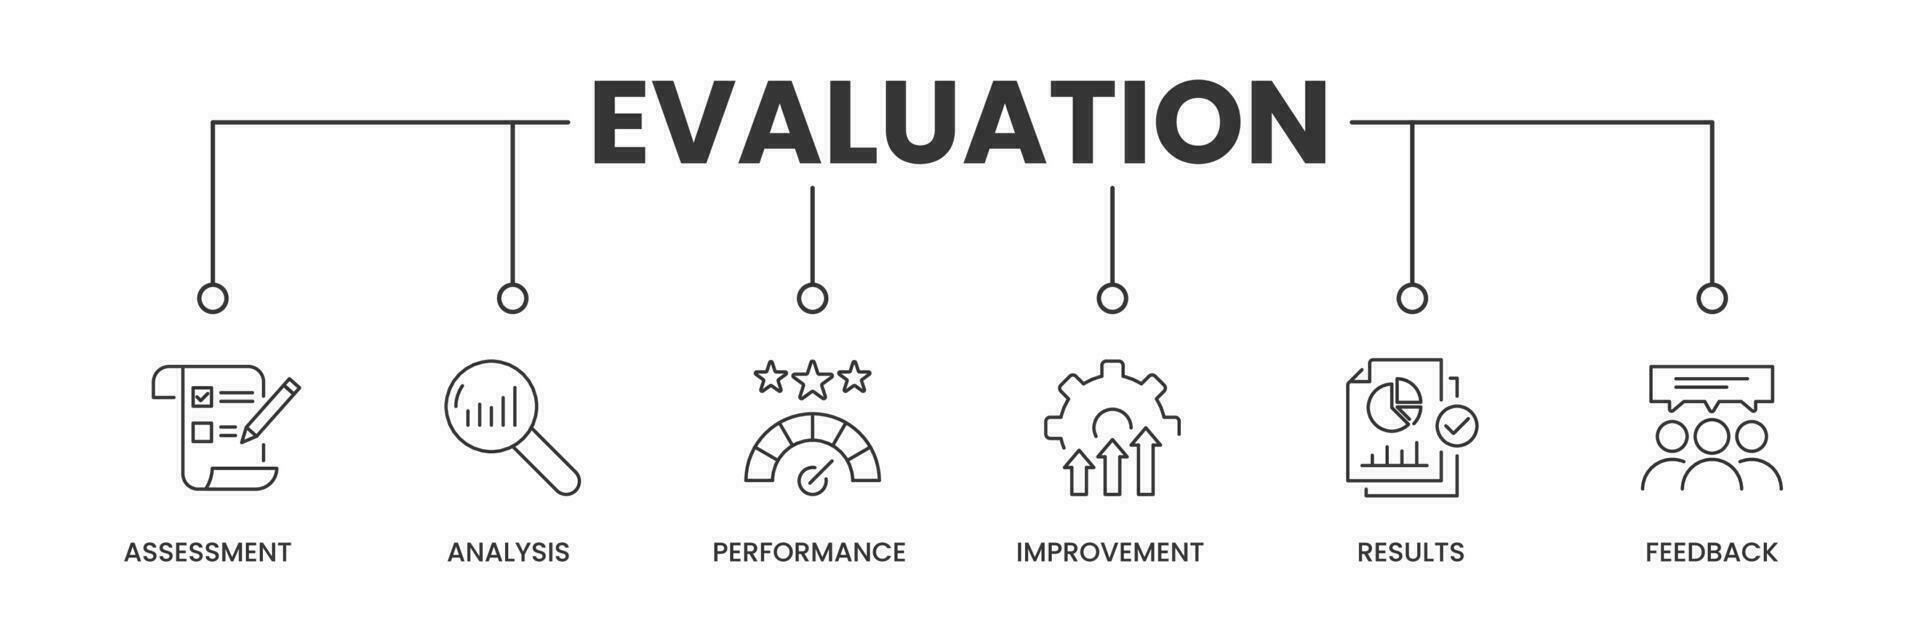 Evaluation banner with icons. Outline icons of Assessment, Analysis, Performance, Improvement, Results, and Feedback. Vector Illustration.